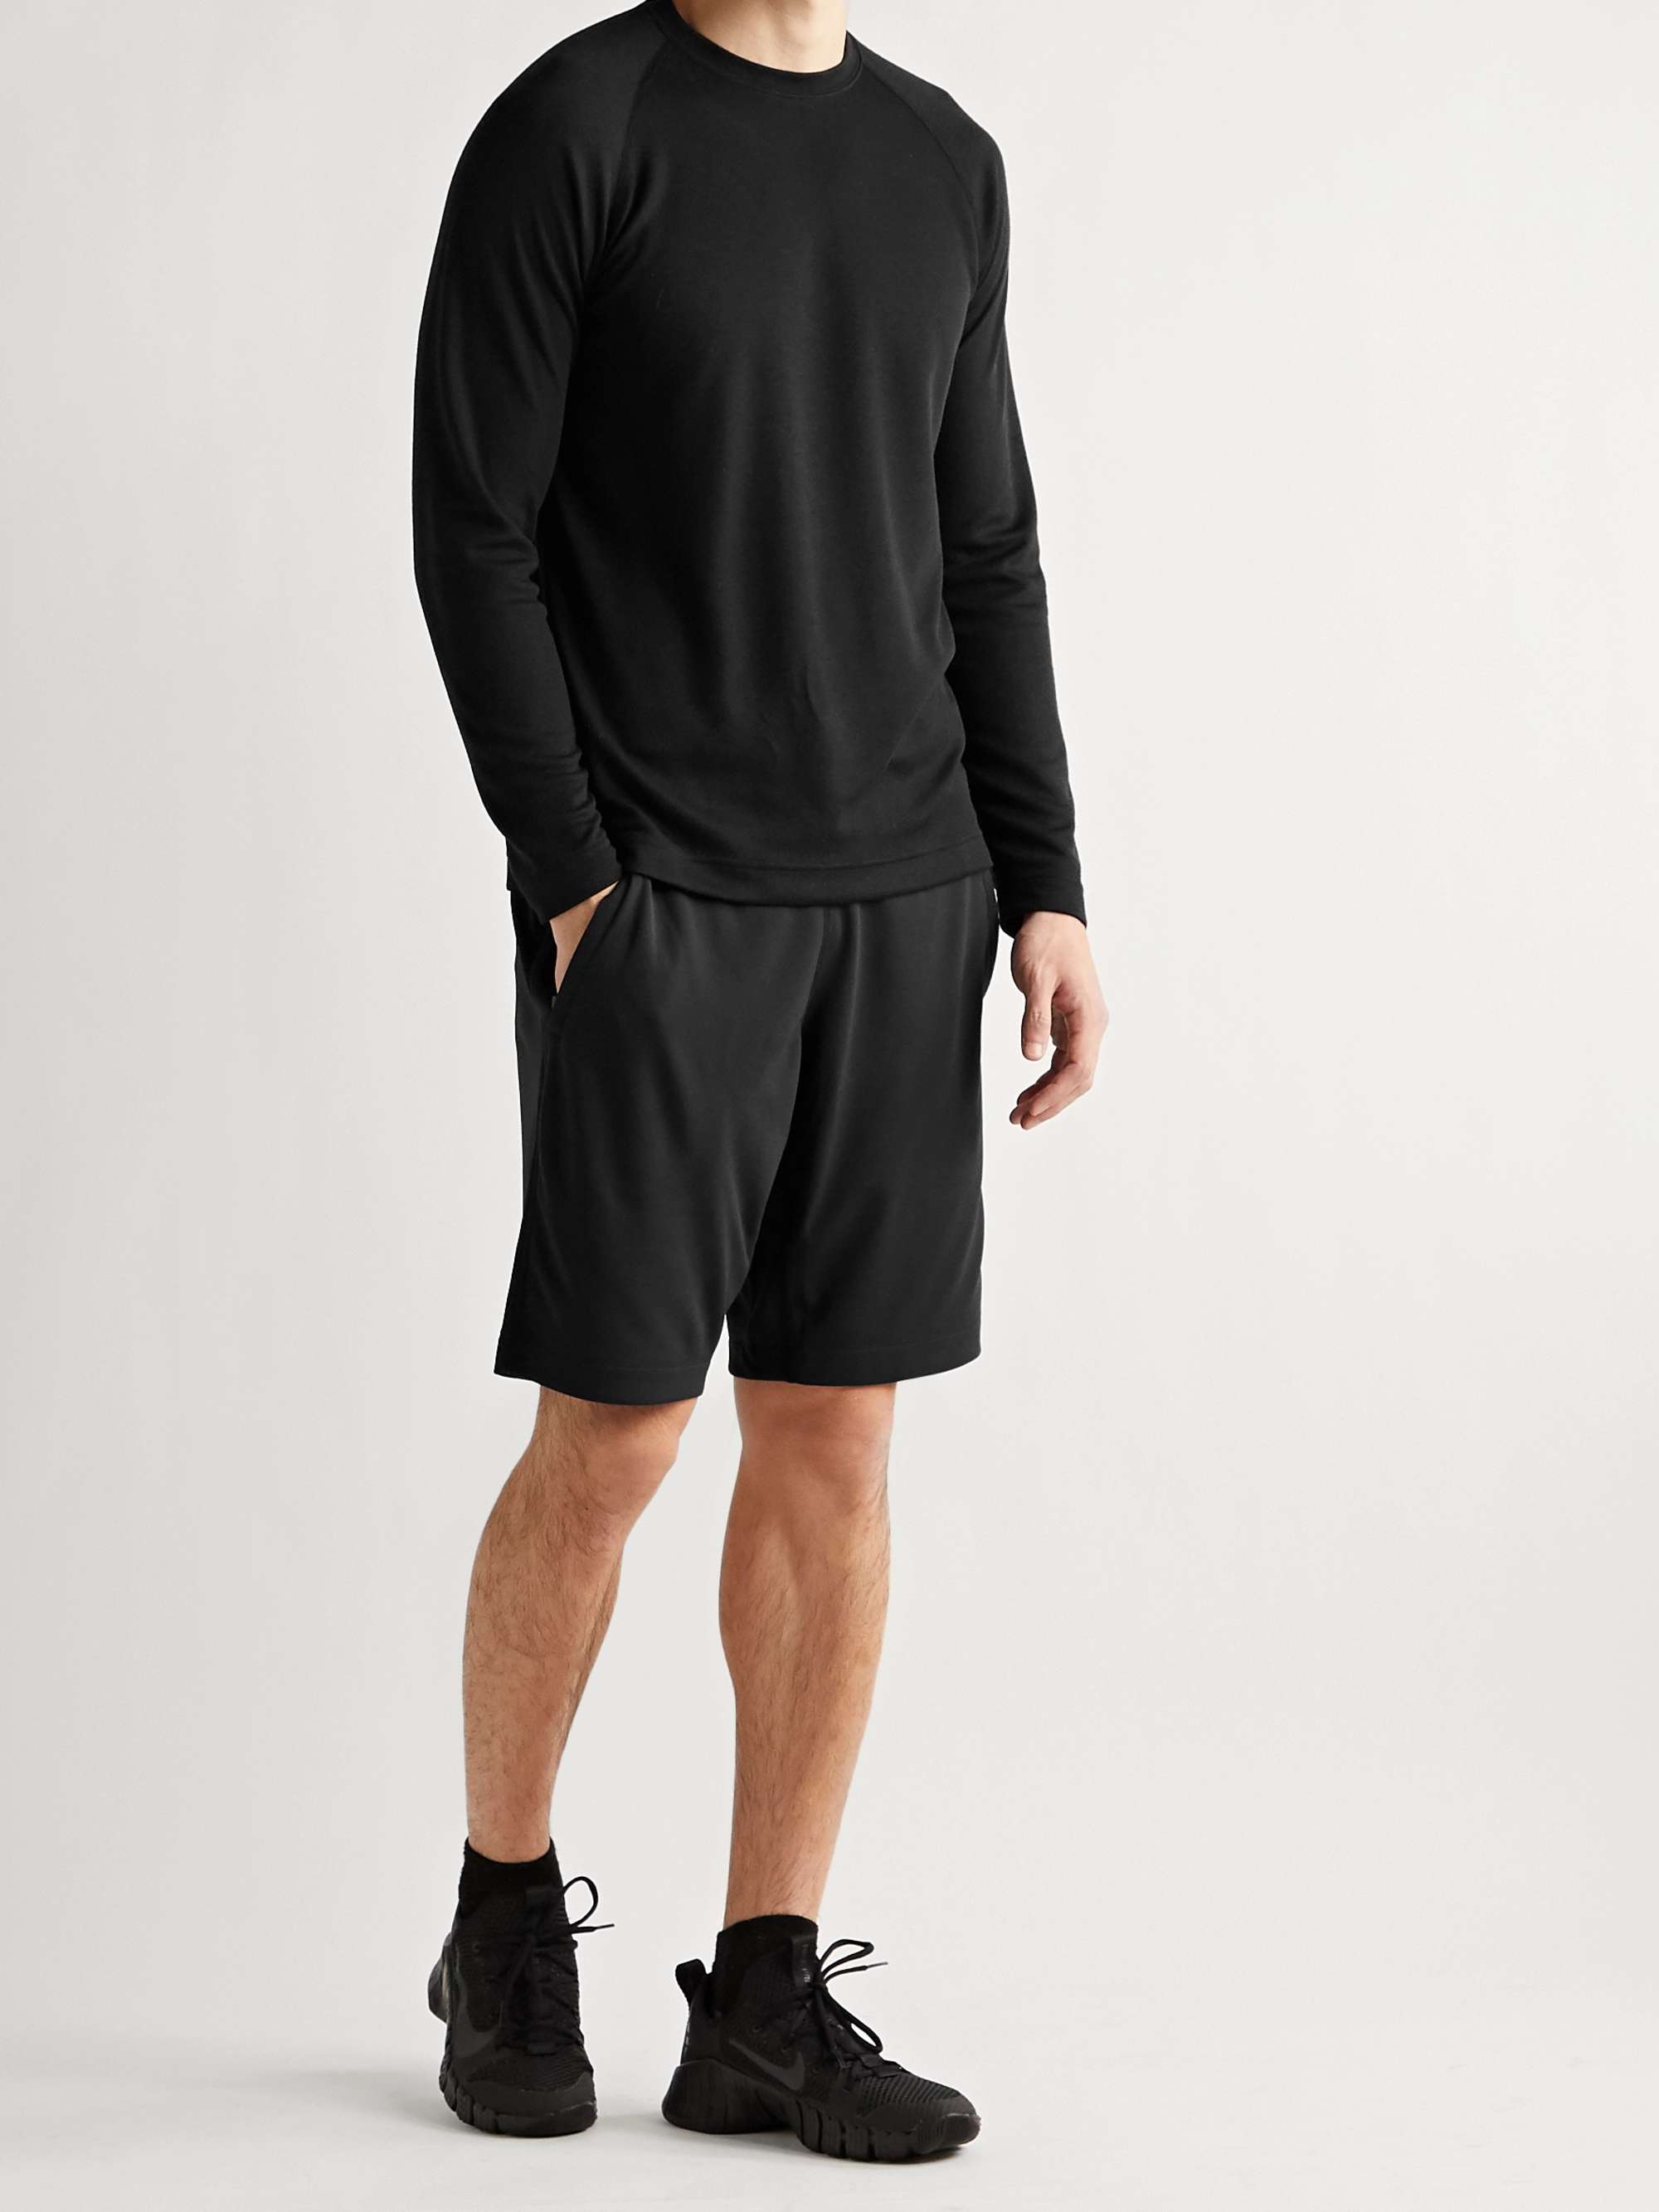 REIGNING CHAMP Slim-Fit Polartec Power Dry Mesh Base Layer